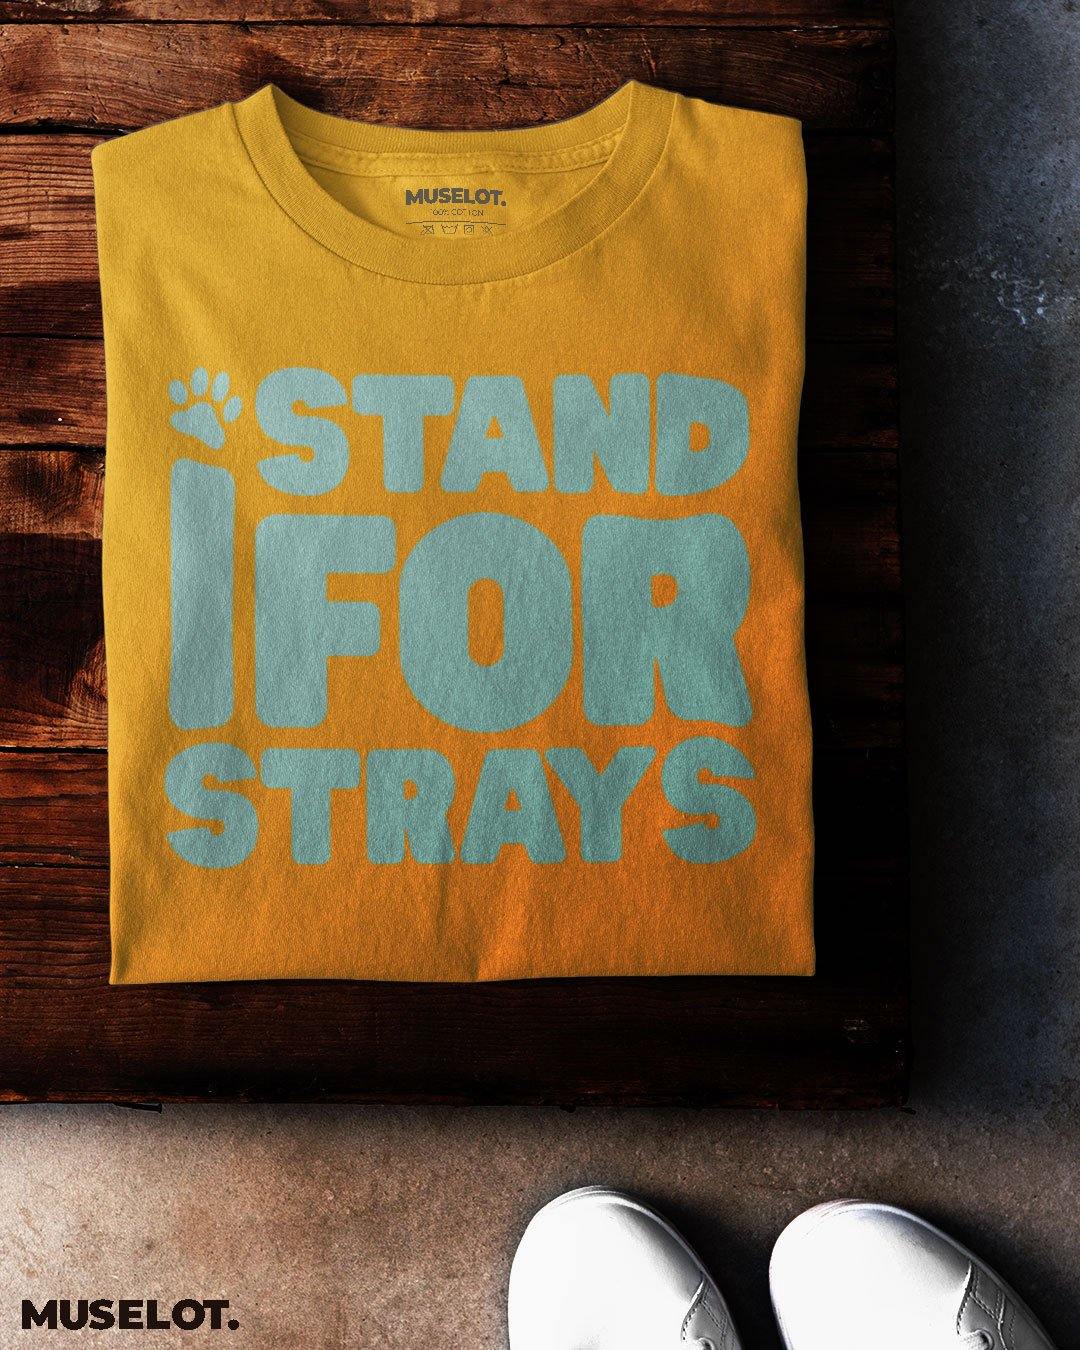 printed t shirts - I stand for strays  - MUSELOT